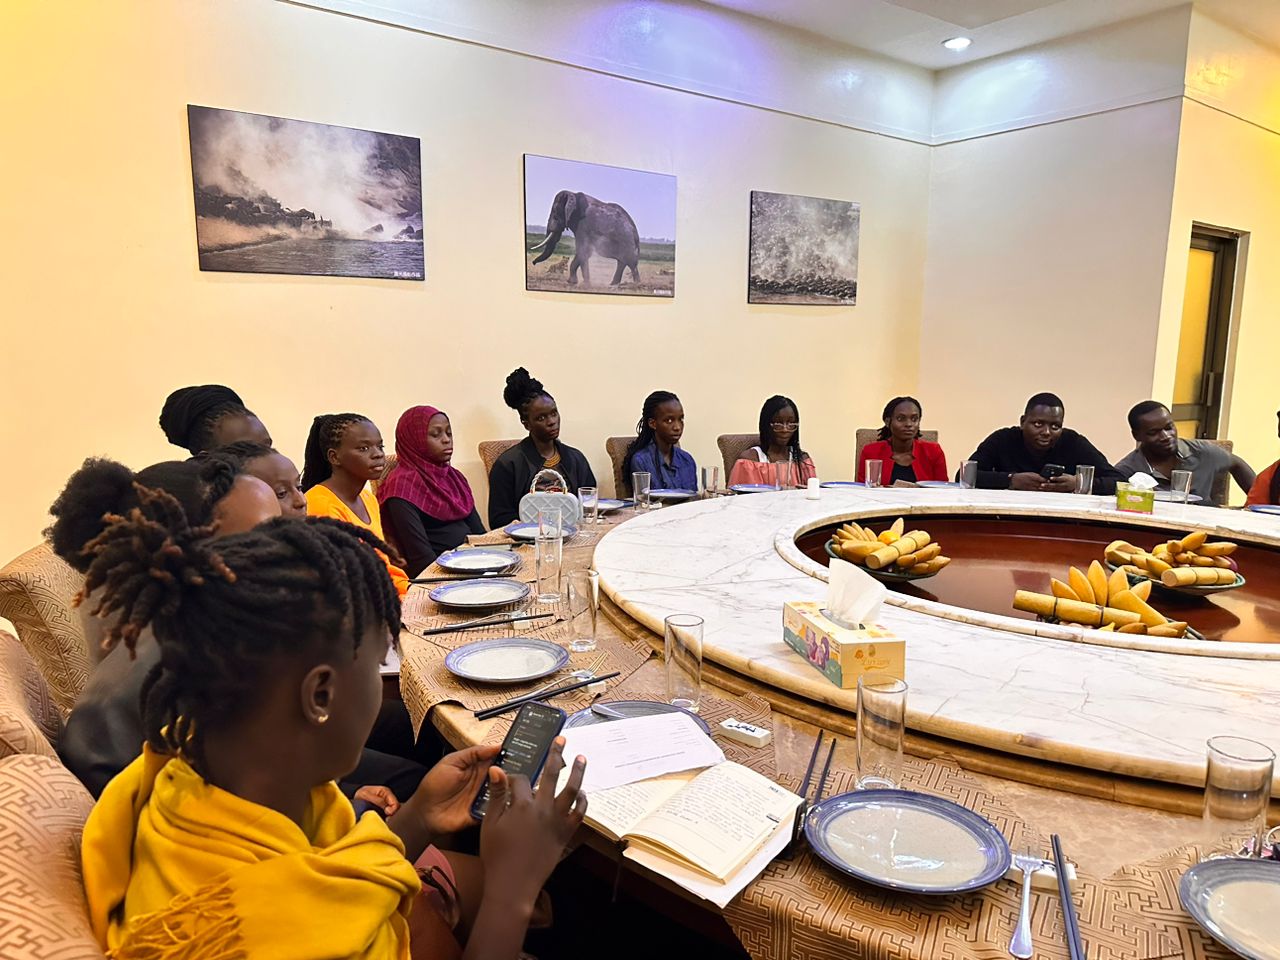 Participants at a round dinner table, discussing girls' education and empowerment at the Unite for Girls Night event.